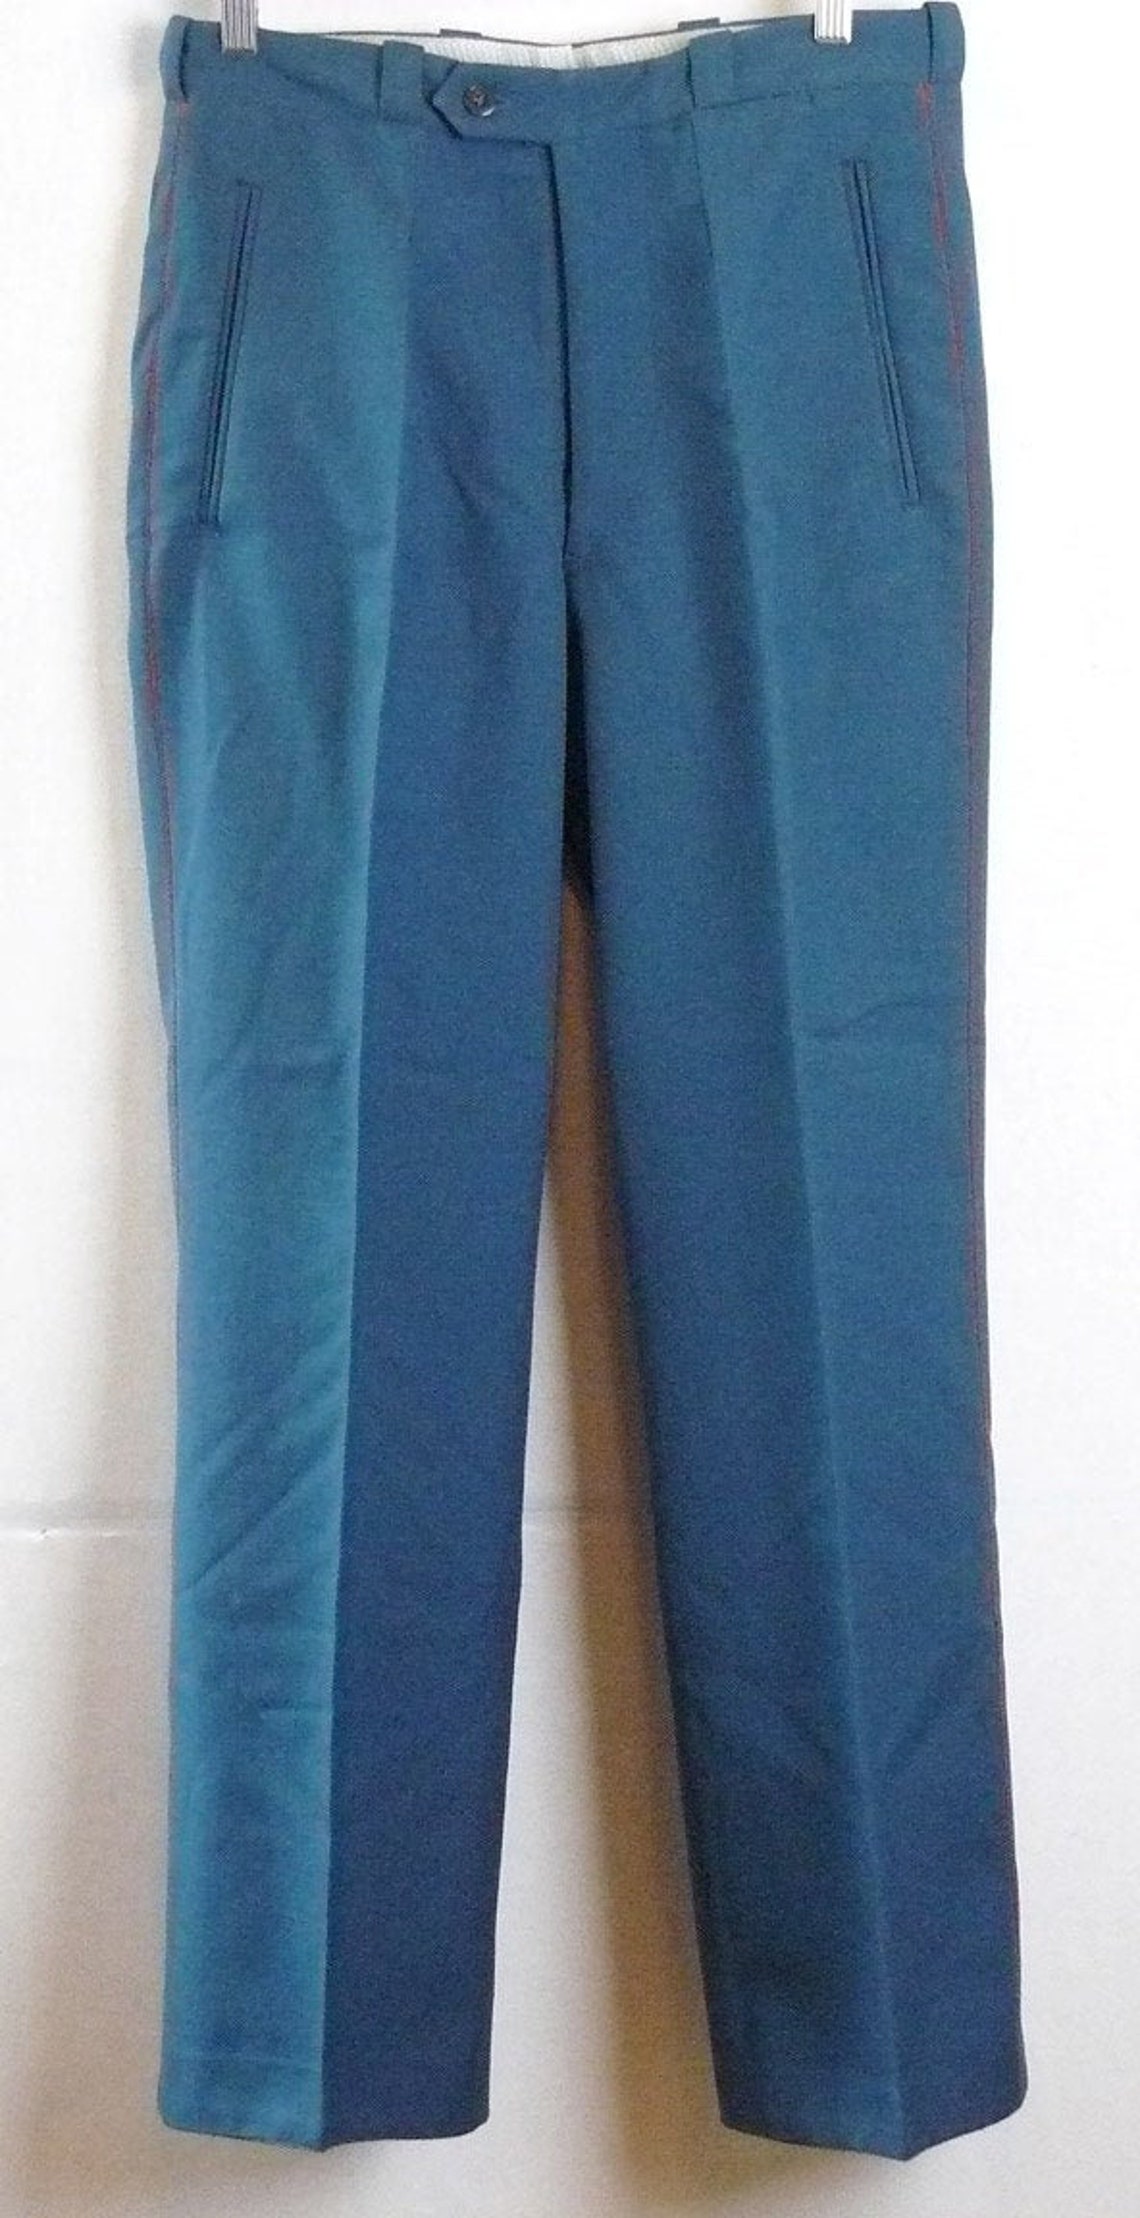 Russian Uniform Parade Pants Trousers Vintage Soviet Army - Etsy